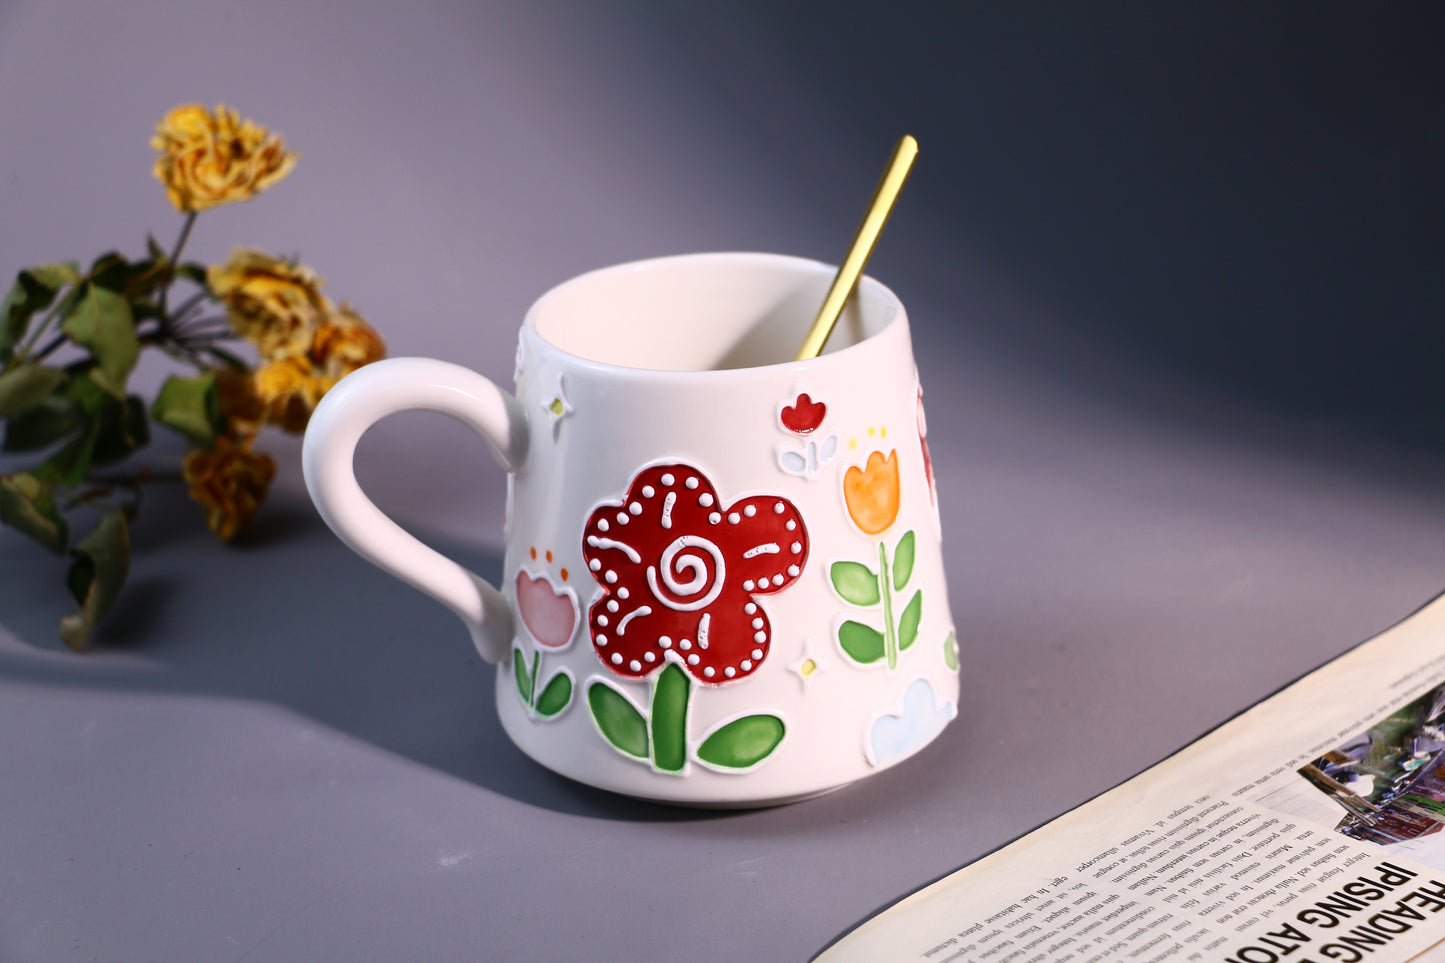 Floral Ceramic Coffee Mug, Personalized Handmade Pottery Cup for Heartwarming Gifts